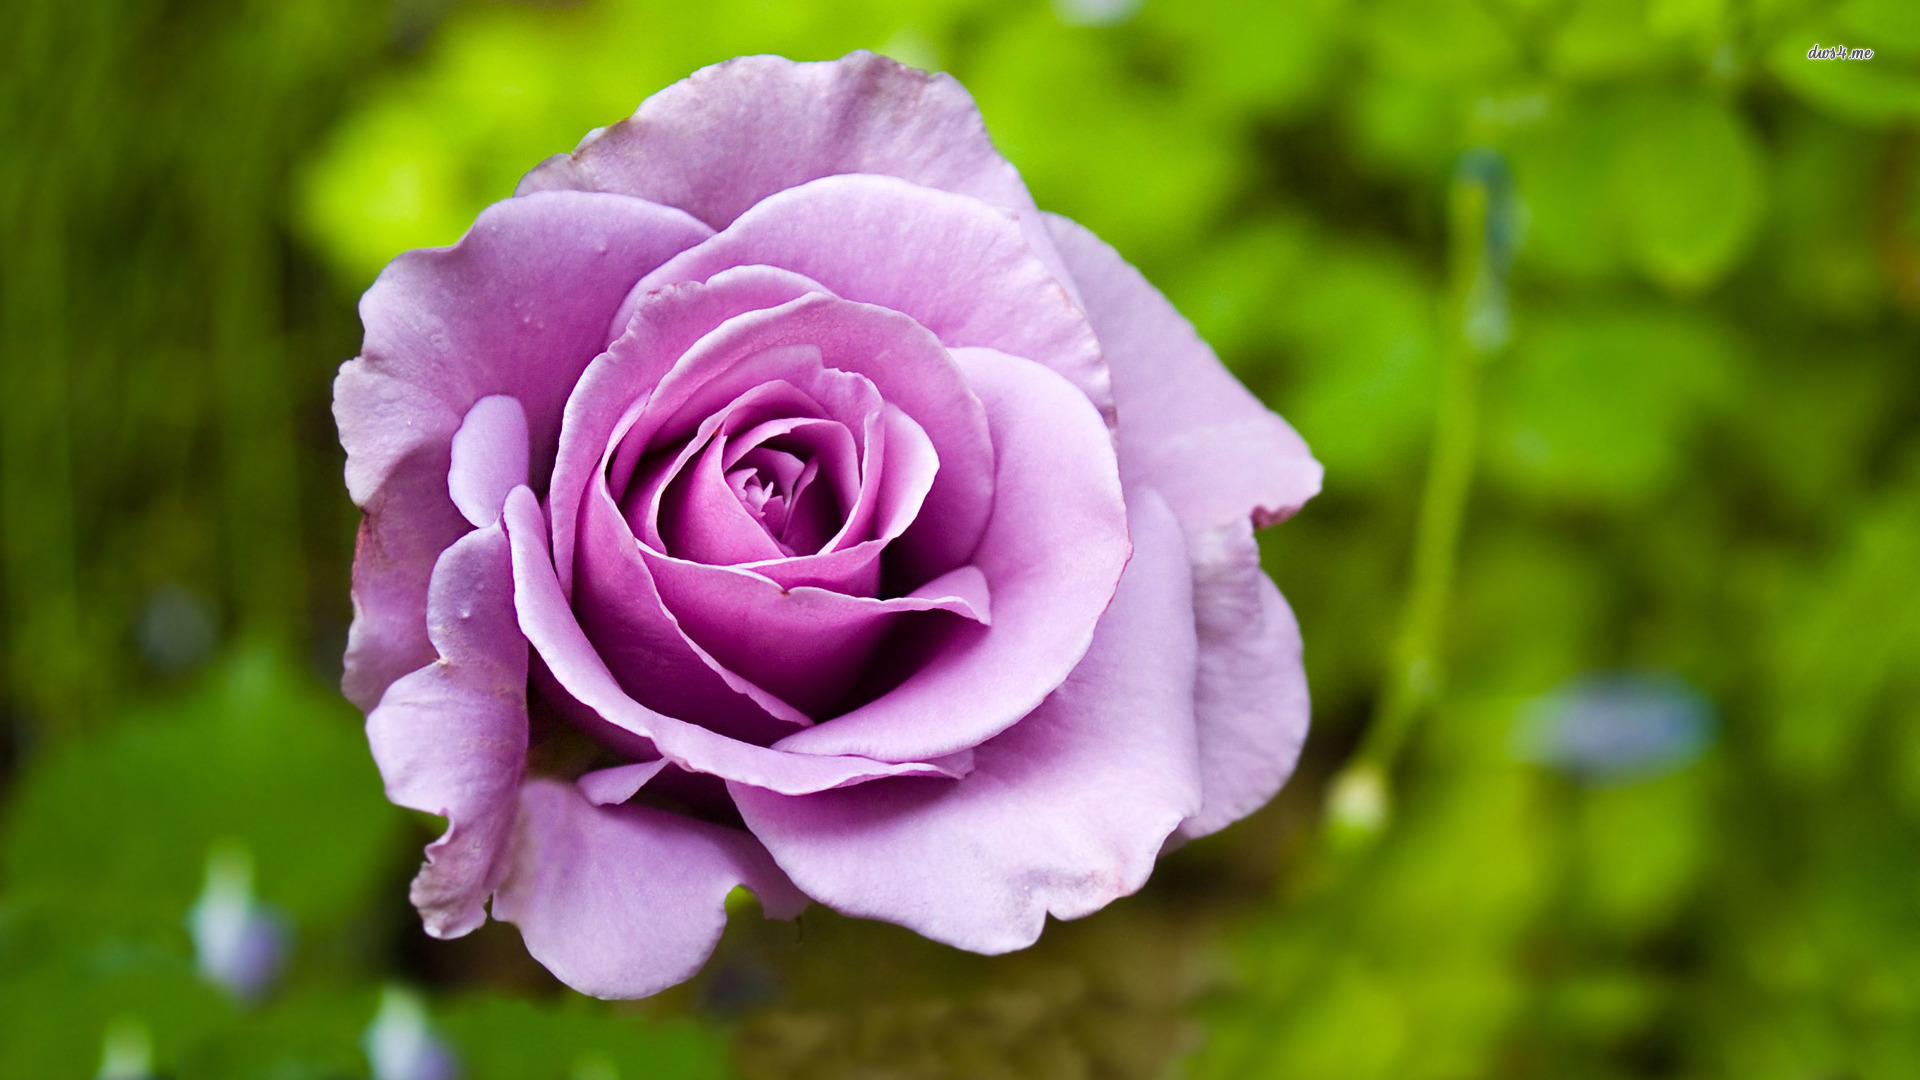 Nature___Flowers_Purple_rose_on_a_background_of_grass_055867_.jpg